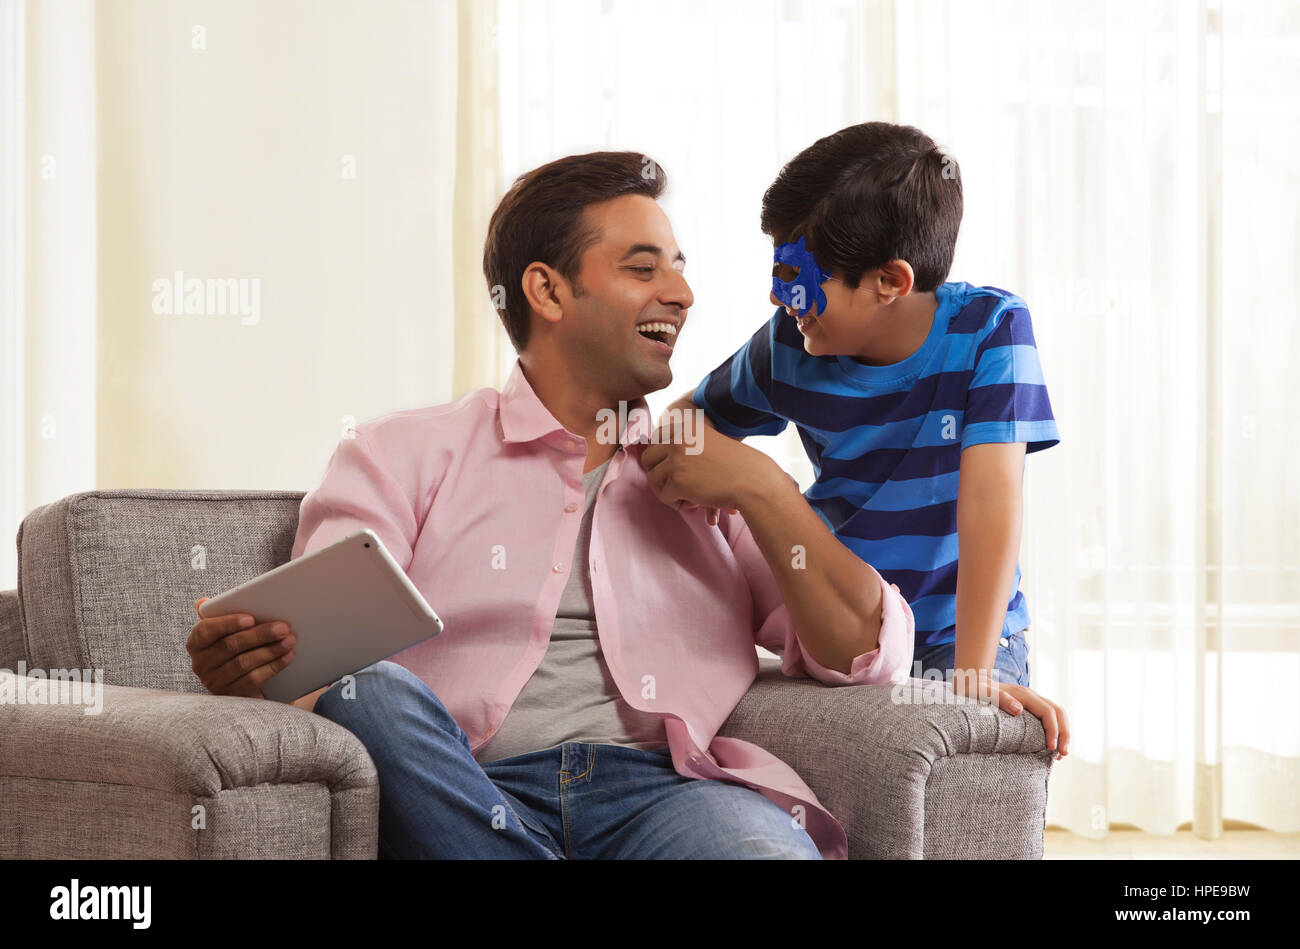 Boy with face mask laughing with his father looking at each other Stock Photo